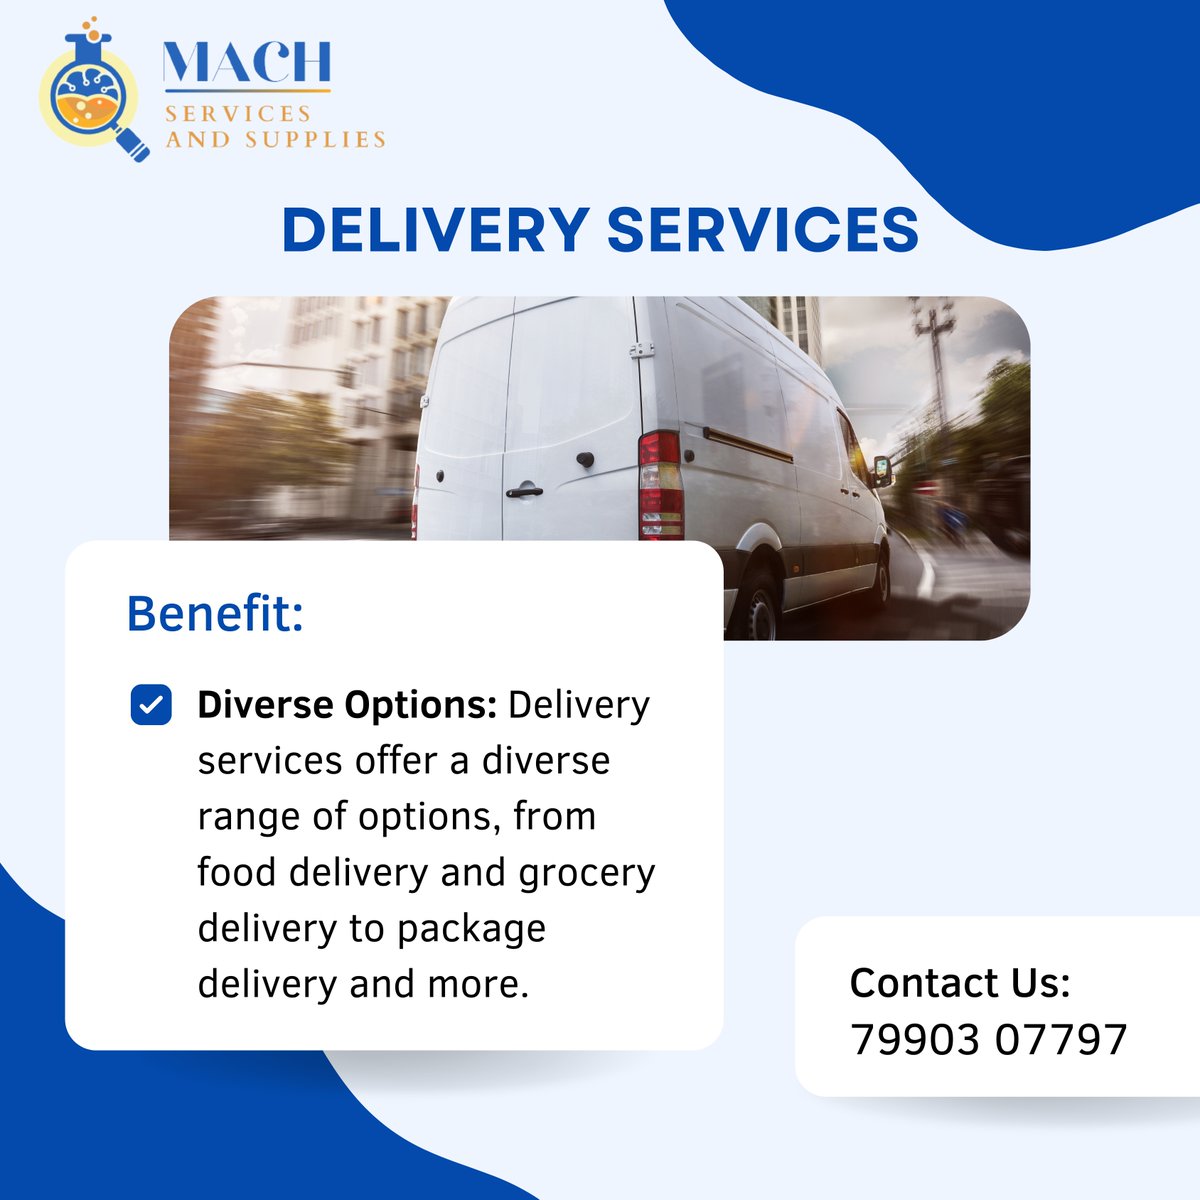 Delivery Services Benefit.
.
.
#delivery #machservicesandsupplies #machservices #deliveryservice #style #love #instagood #like #photography #motivation #motivationalquotes #inspiration #surat #suratcity #suratfood #suratphotoclub #sunofcitysurat #sürat #wearehiring #india #grow